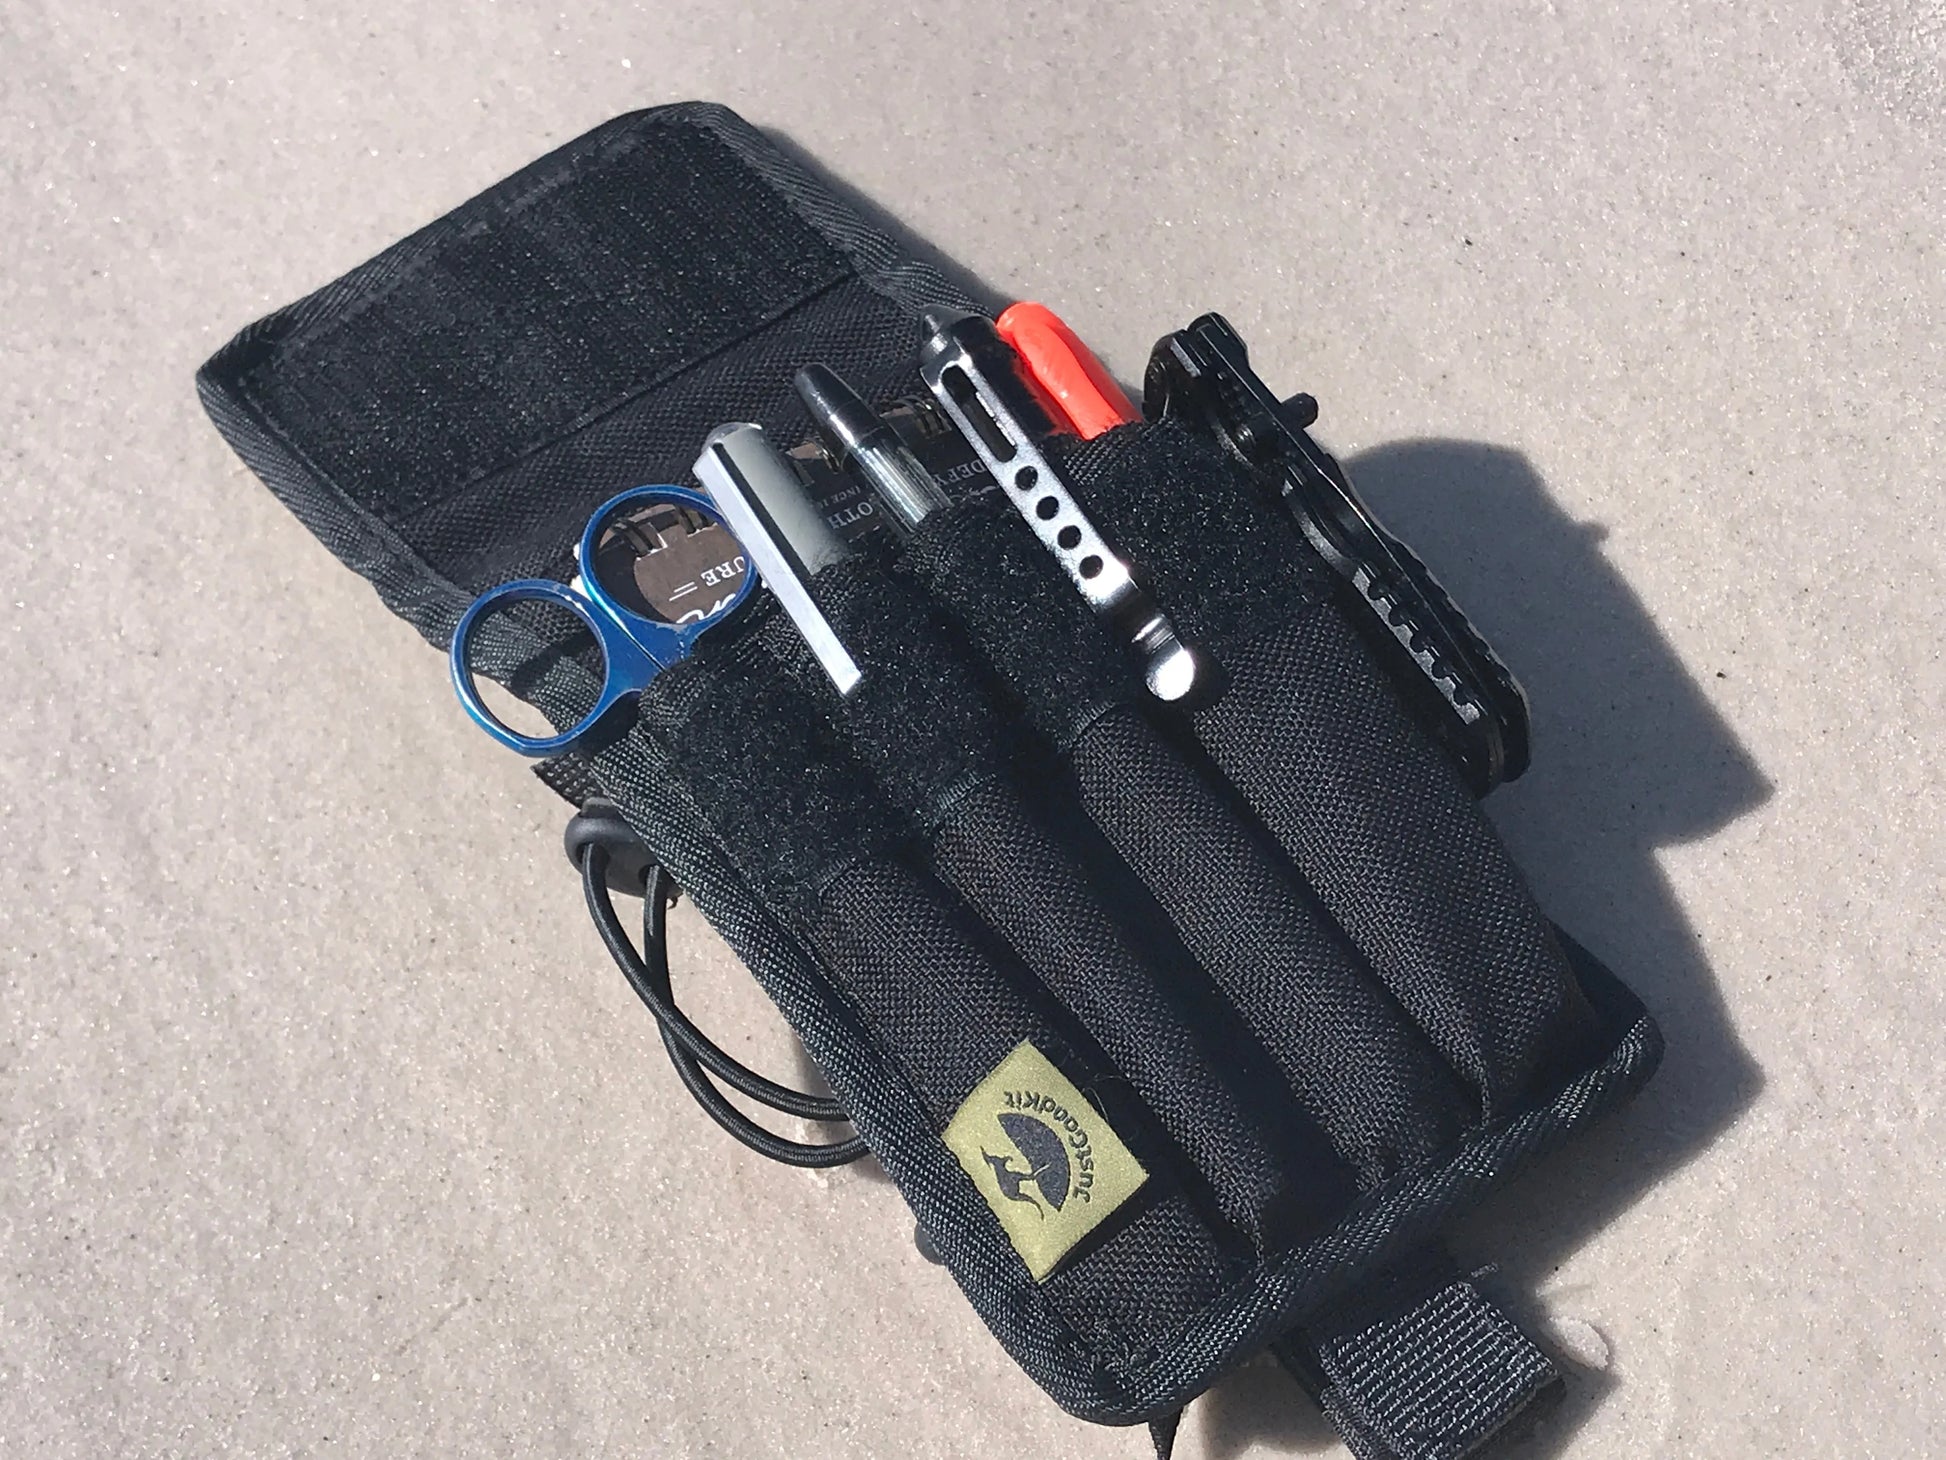 Tactical Pen Pouch - by JustGoodKit JustGoodKit Tactical Pen Pouch - by JustGoodKit Tactical Pen Pouch